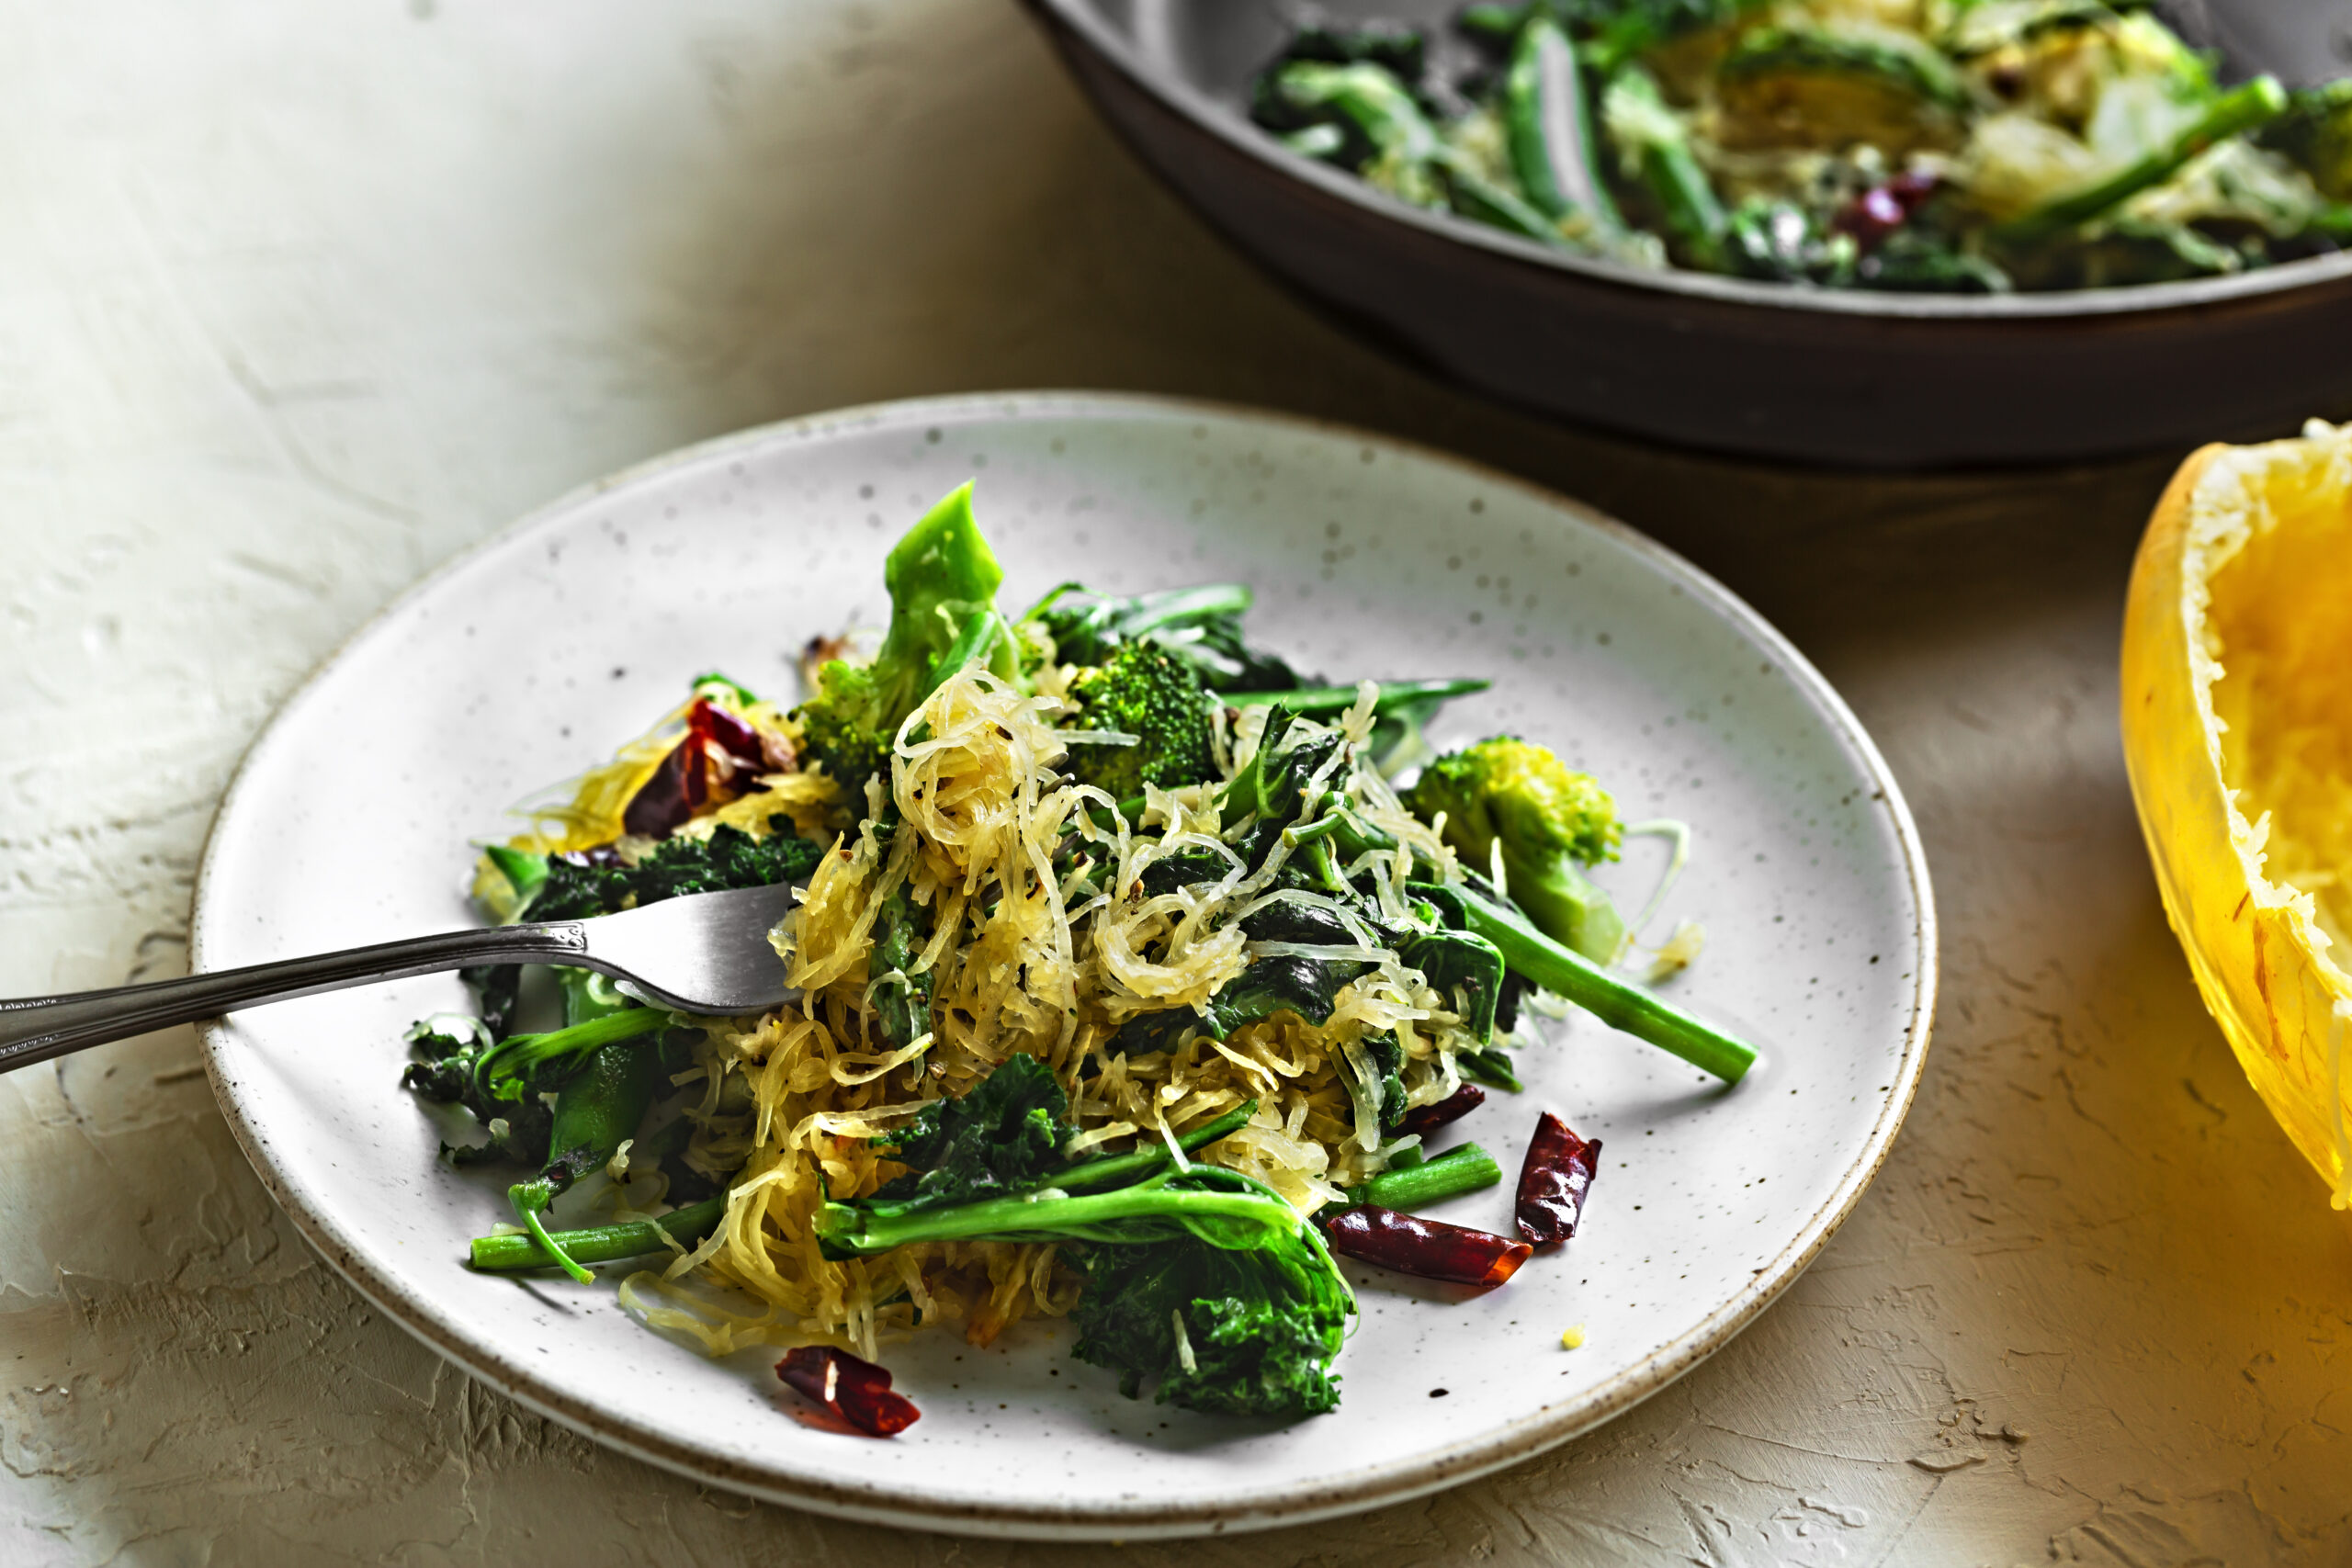 Brussel Sprouts, Broccoli and Kale with Spaghetti Squash | Healthy Recipe